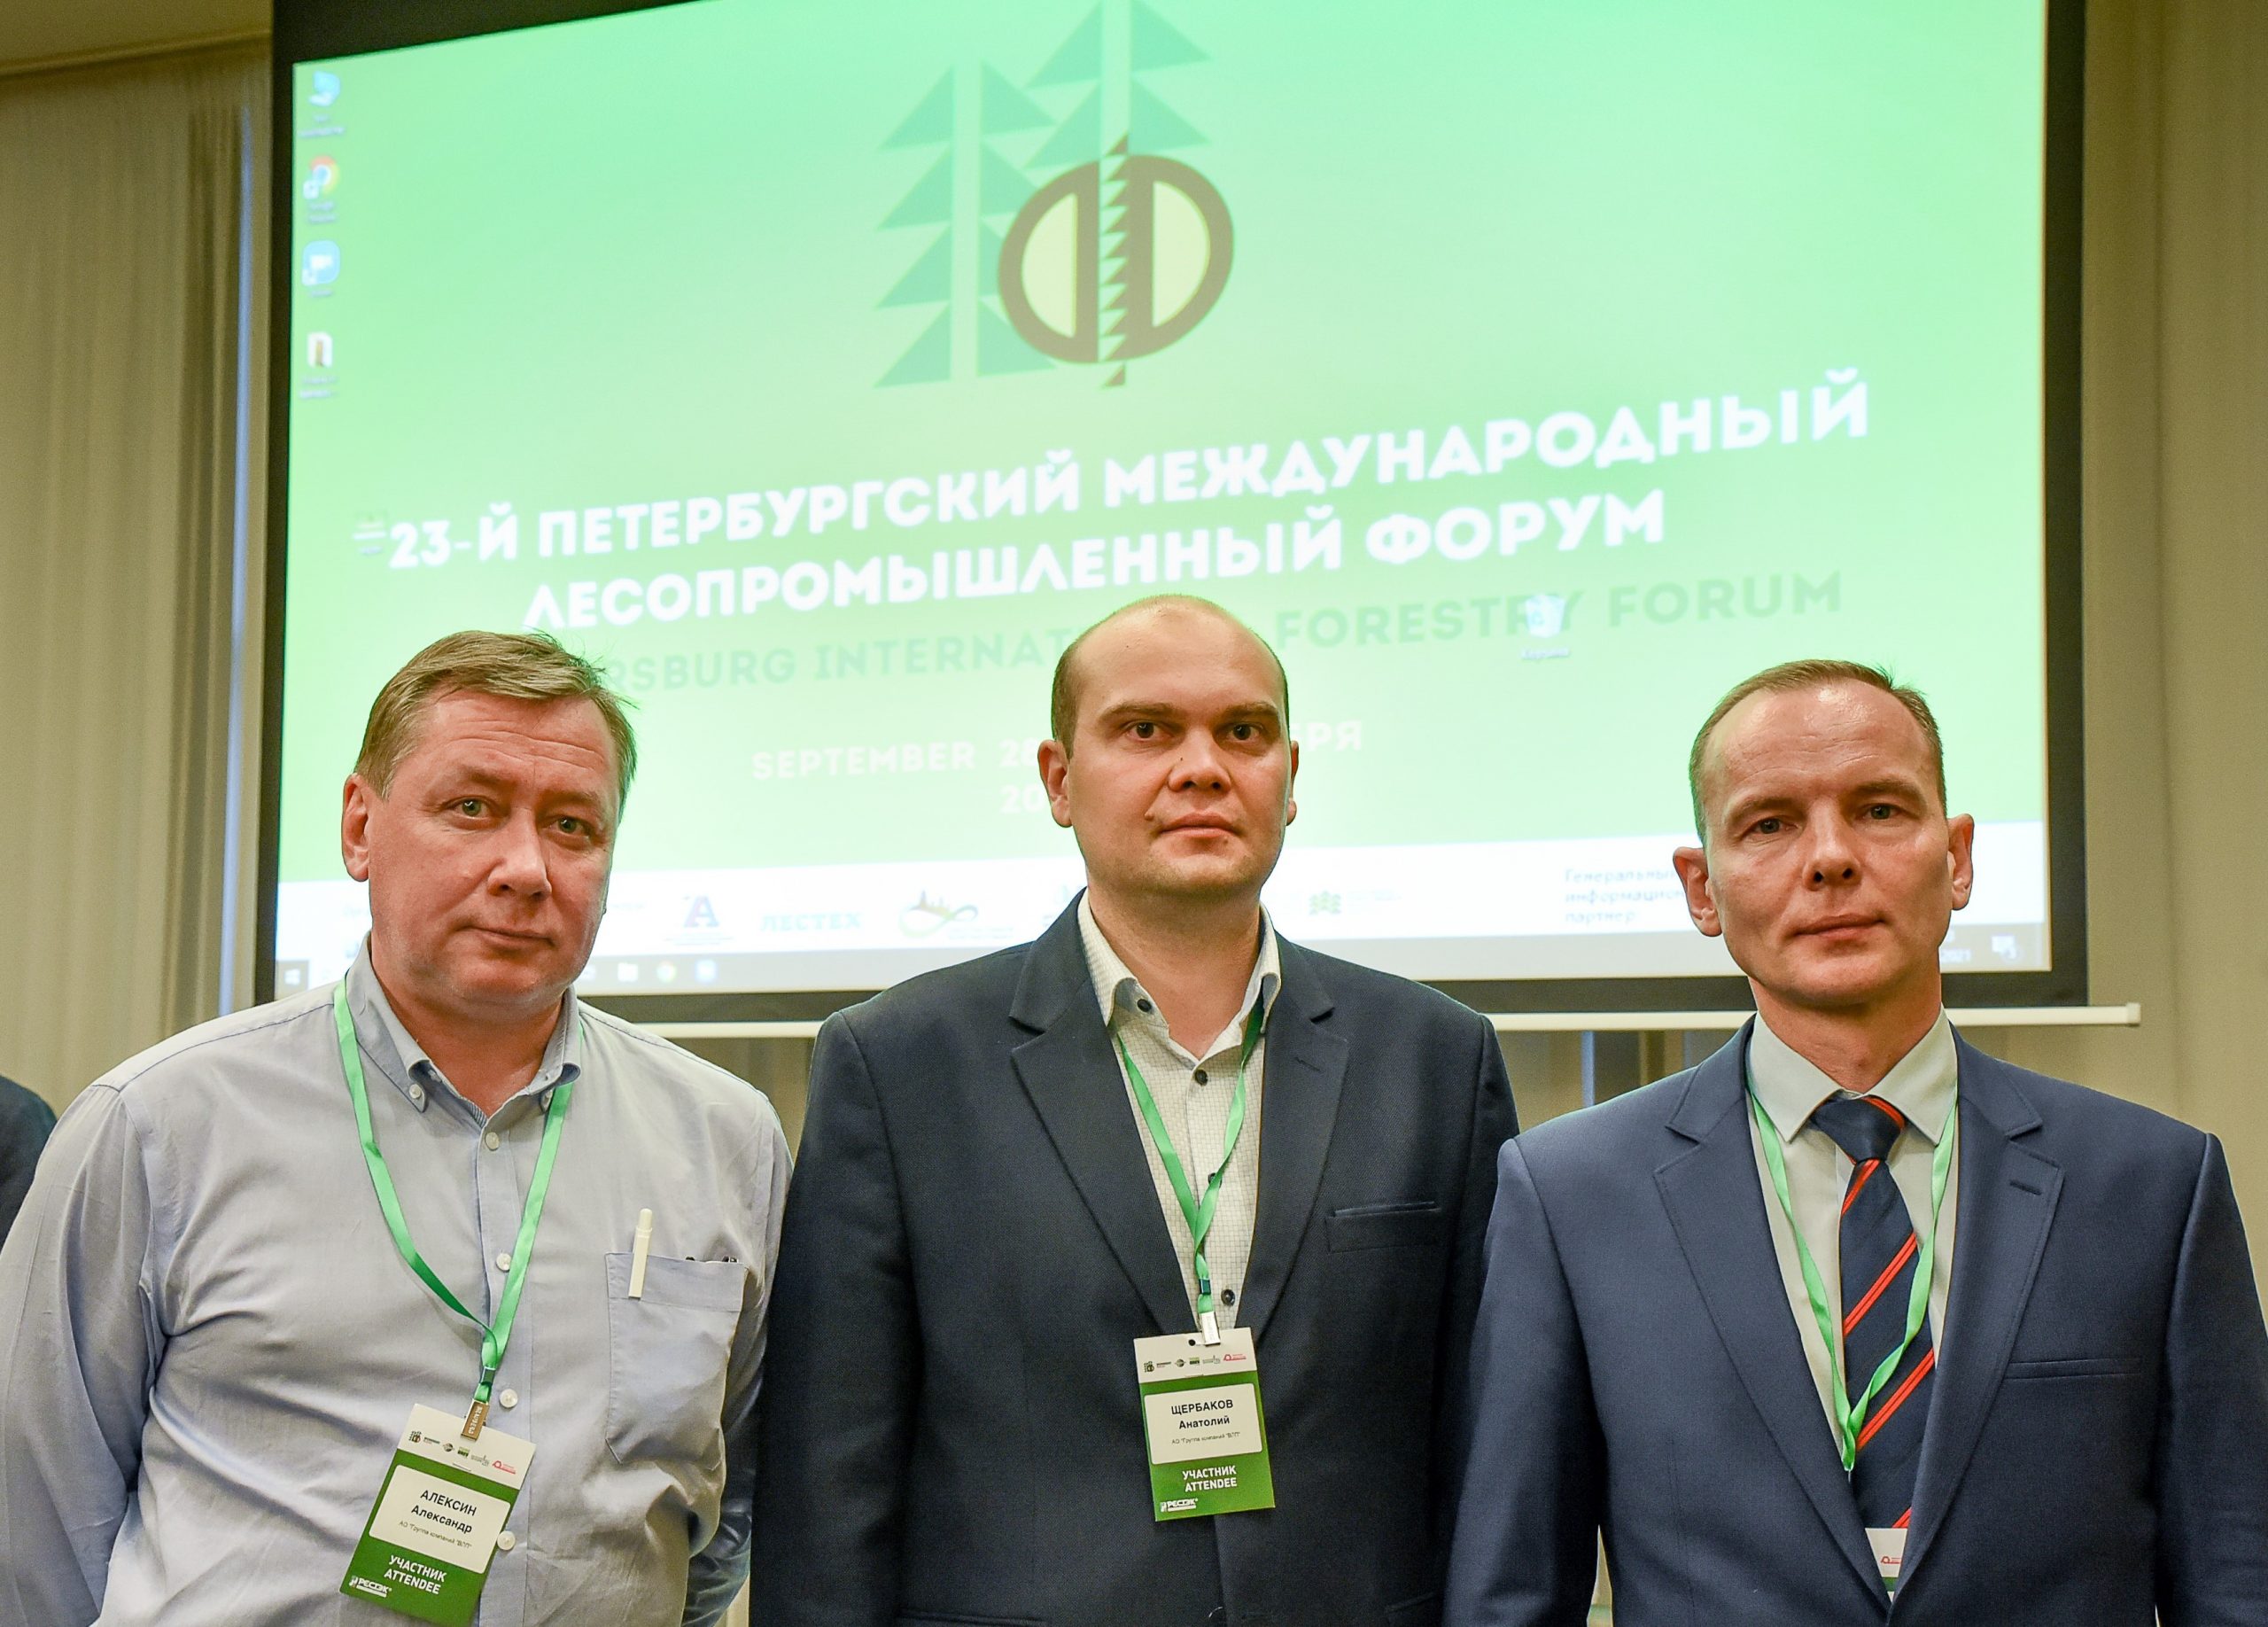 “Vologda timber industrialists” visited the 23rd St. Petersburg International Forestry Forum